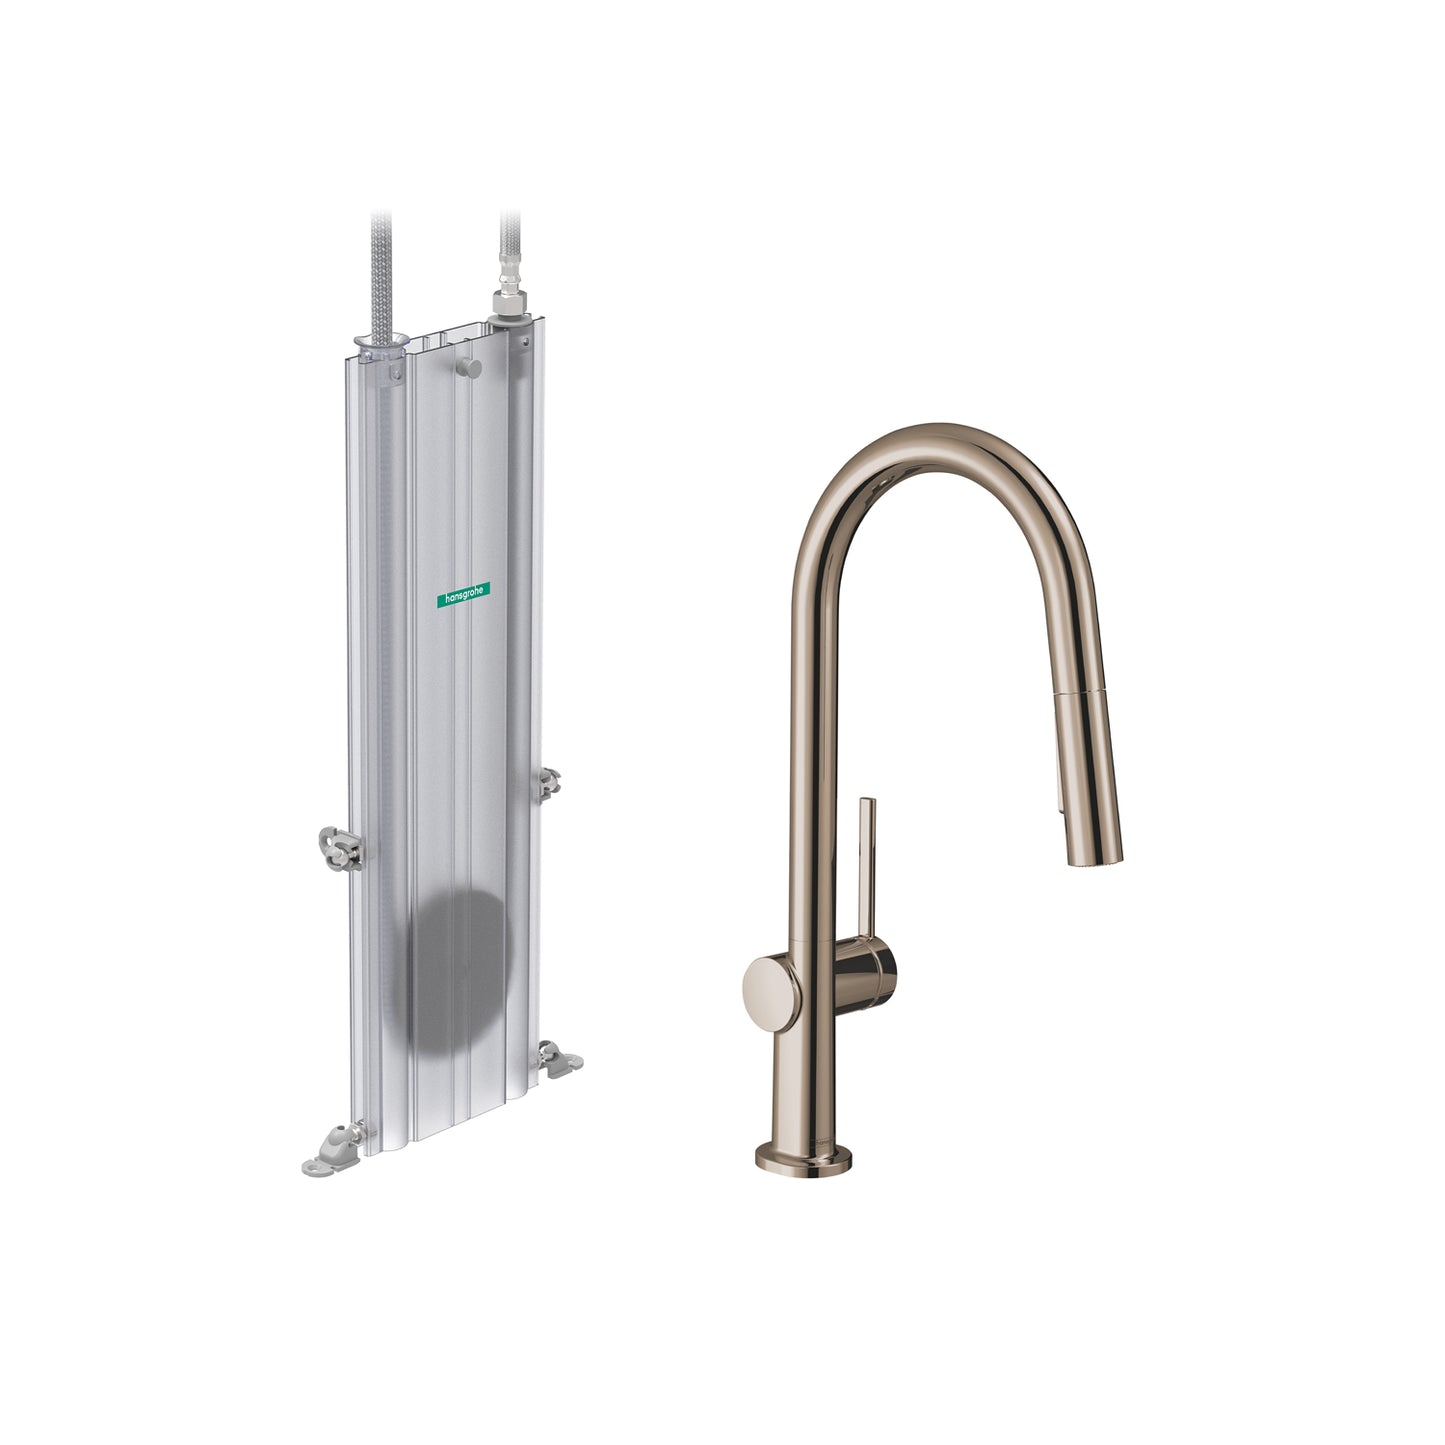 HANSGROHE 72850831 Polished Nickel Talis N Modern Kitchen Faucet 1.75 GPM